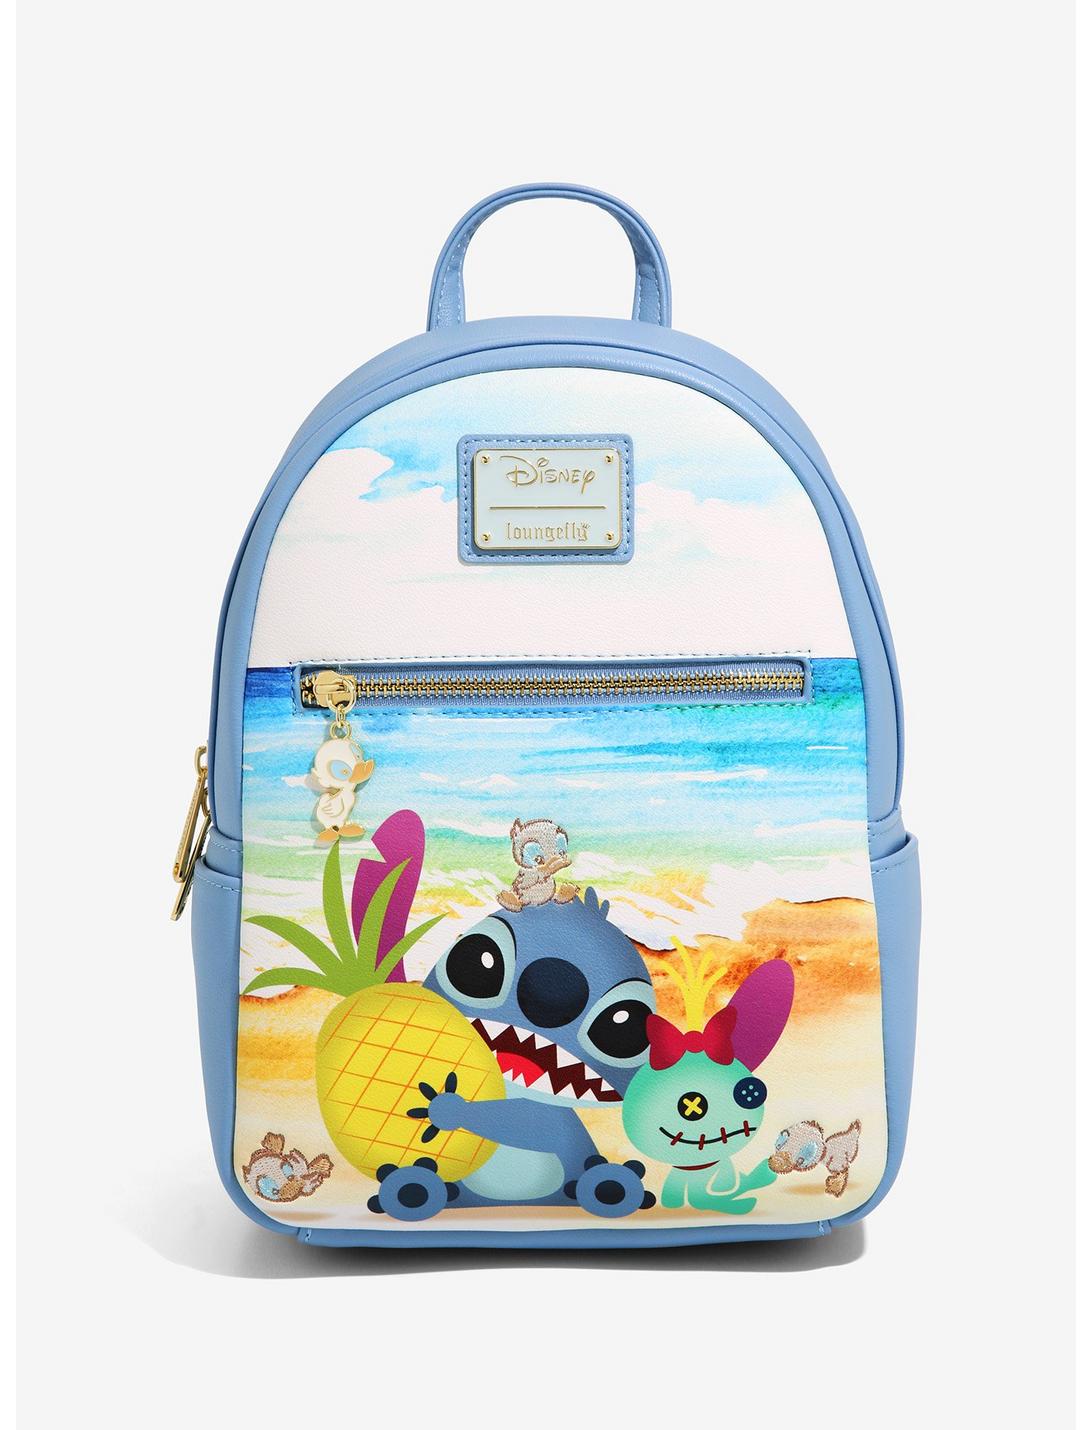 Details about   LOUNGEFLY STITCH WATER DUCKLINGS MINI BACKPACK NEW WITH TAGS